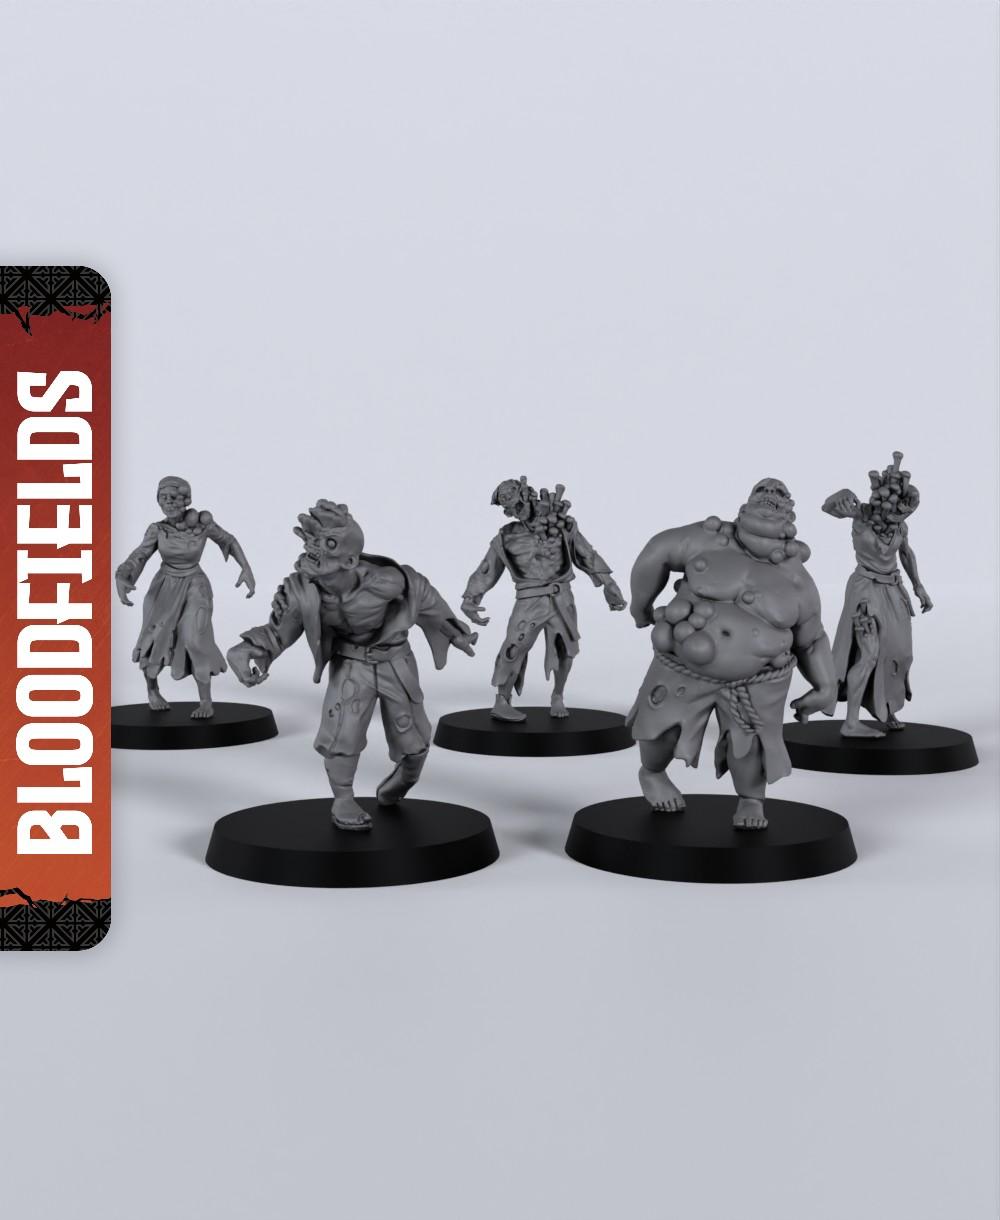 Shroom Zombies - With Free Dragon Warhammer - 5e DnD Inspired for RPG and Wargamers 3d model